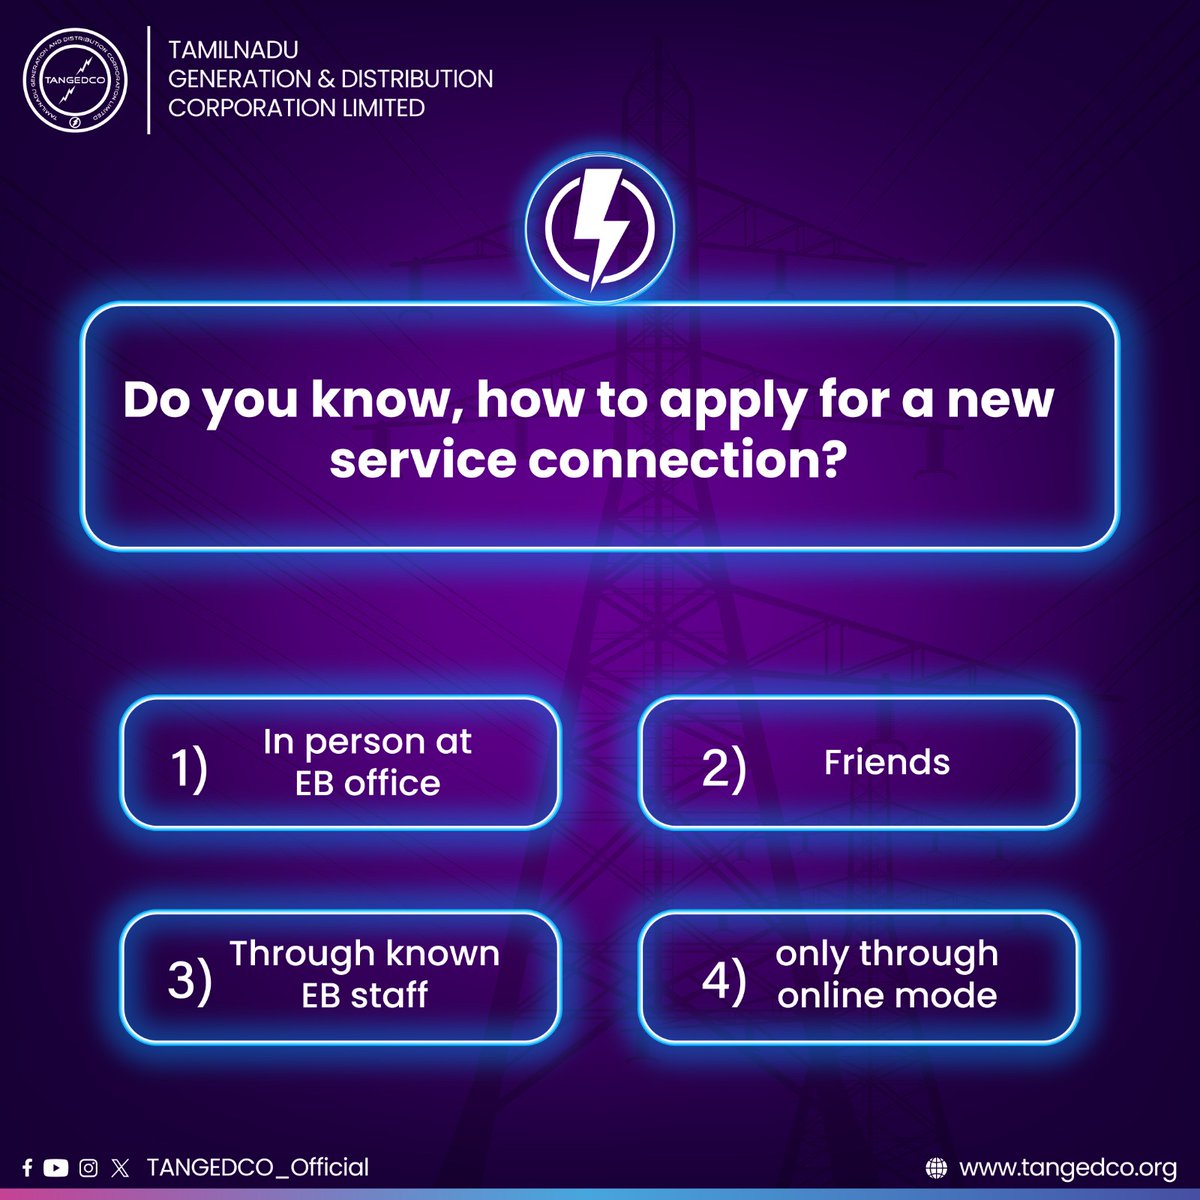 Do you know, how to apply for new service connection at TANGEDCO? Comment your answer below! #DigitalTransparency | #TANGEDCO | #tneb @TNDIPRNEWS | @CMOTamilnadu | @TThenarasu